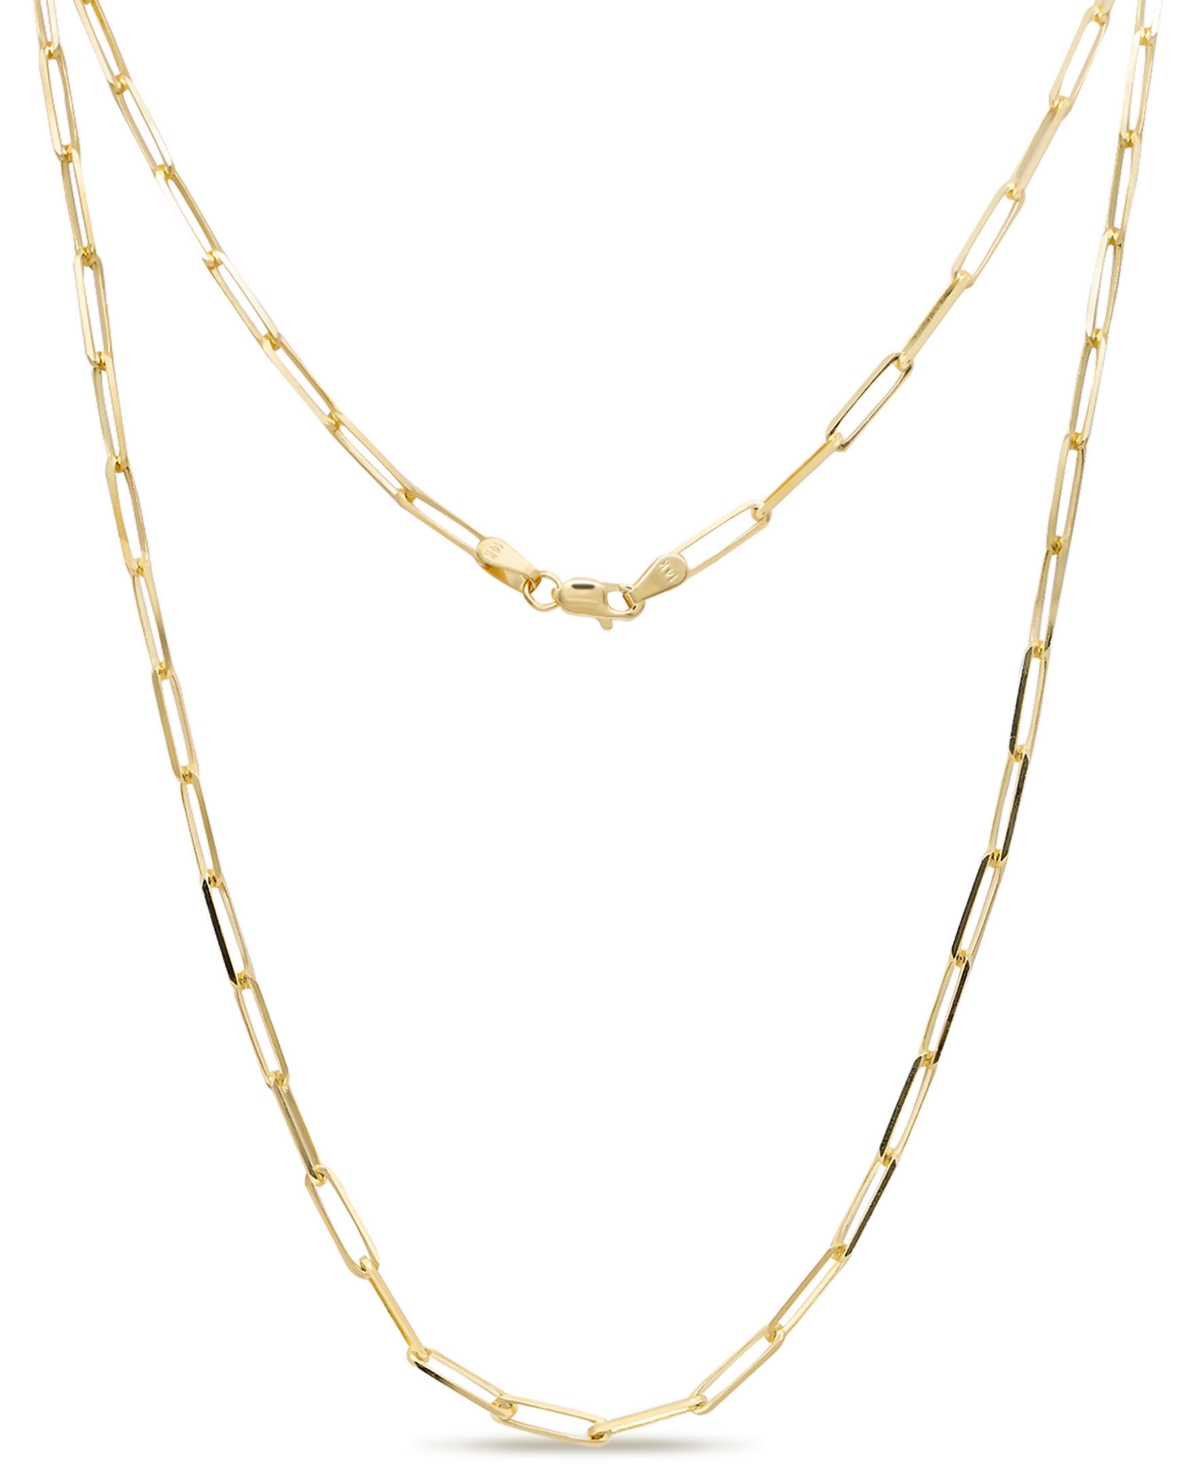 14K Gold Paperclip 2.8mm Chain Necklace, 16", approx. 4.4gr - Gold